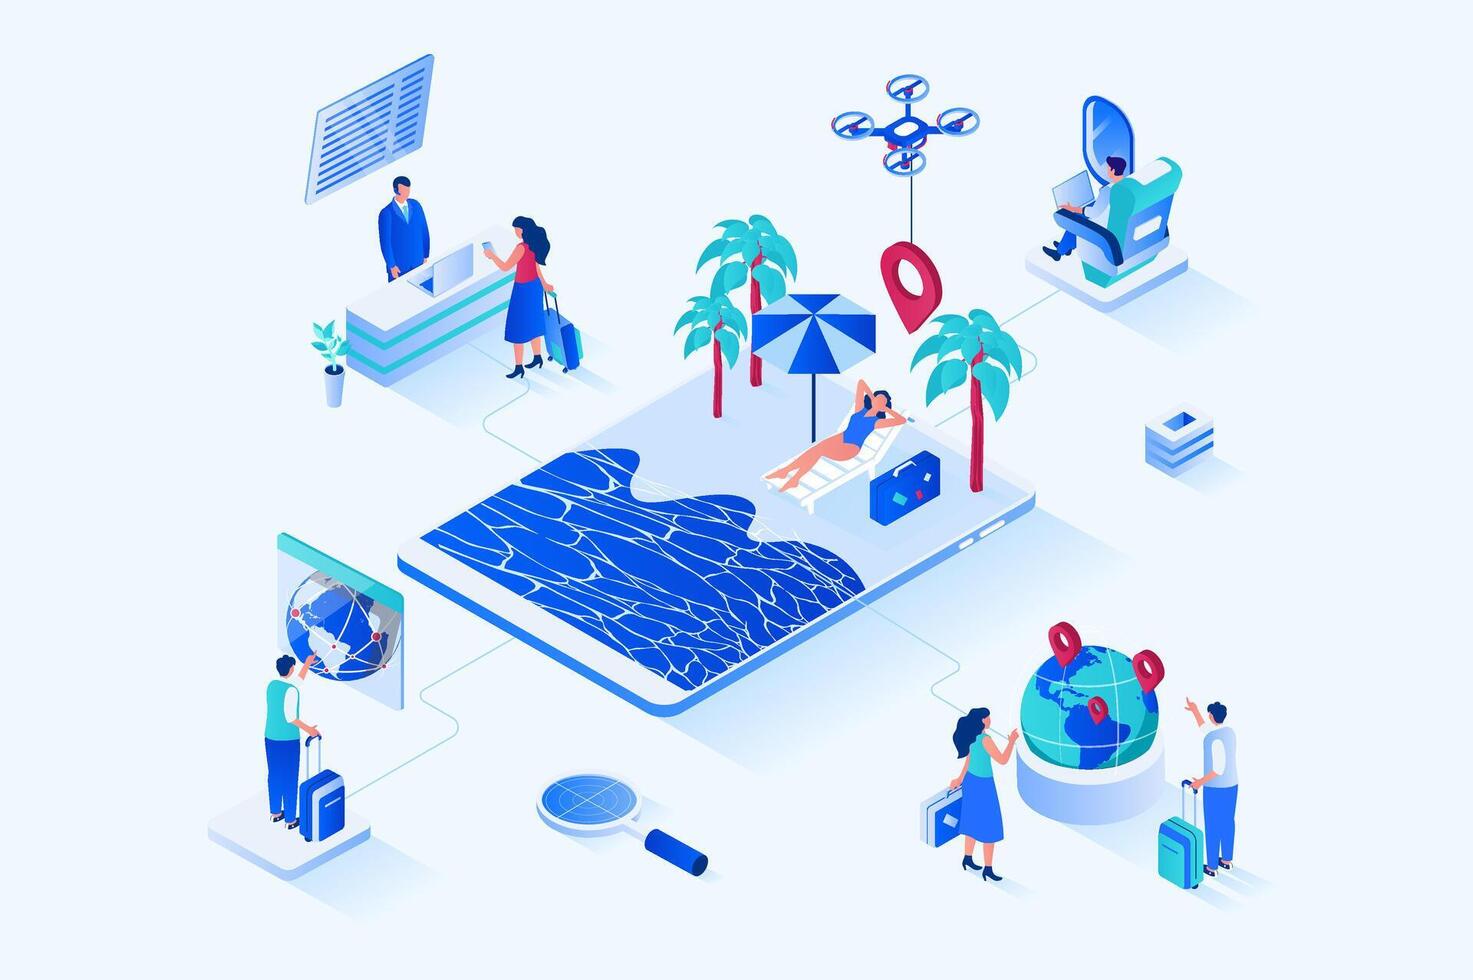 Travel vacation 3d isometric web design. People choose direction for travel, go on vacation with luggage, fly by plane, check into hotel and relax on tropical island by ocean. web illustration vector